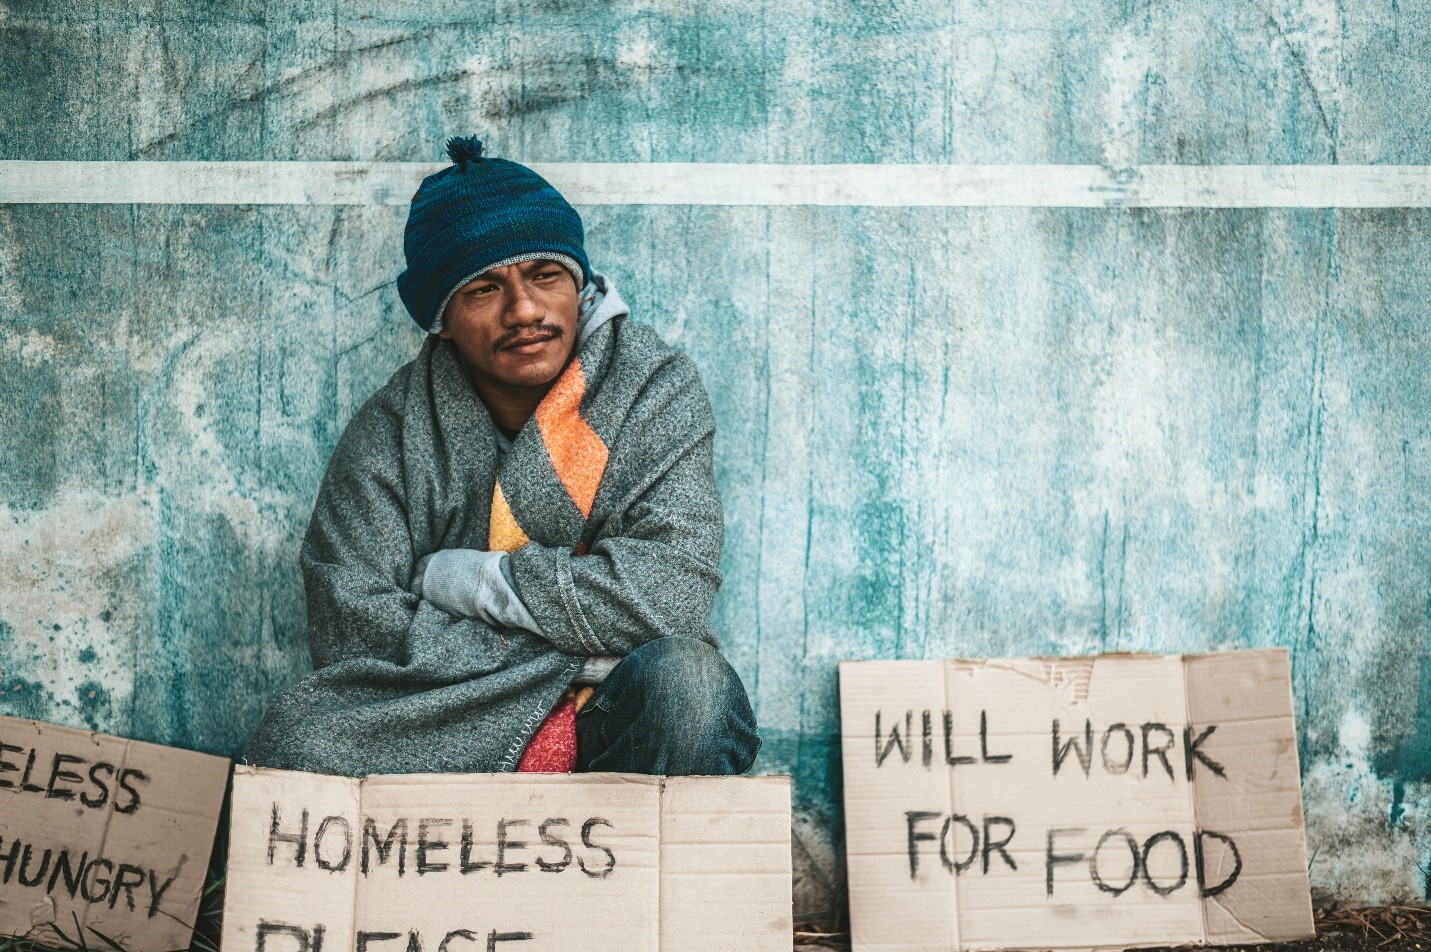 a hungry homeless person looking for work